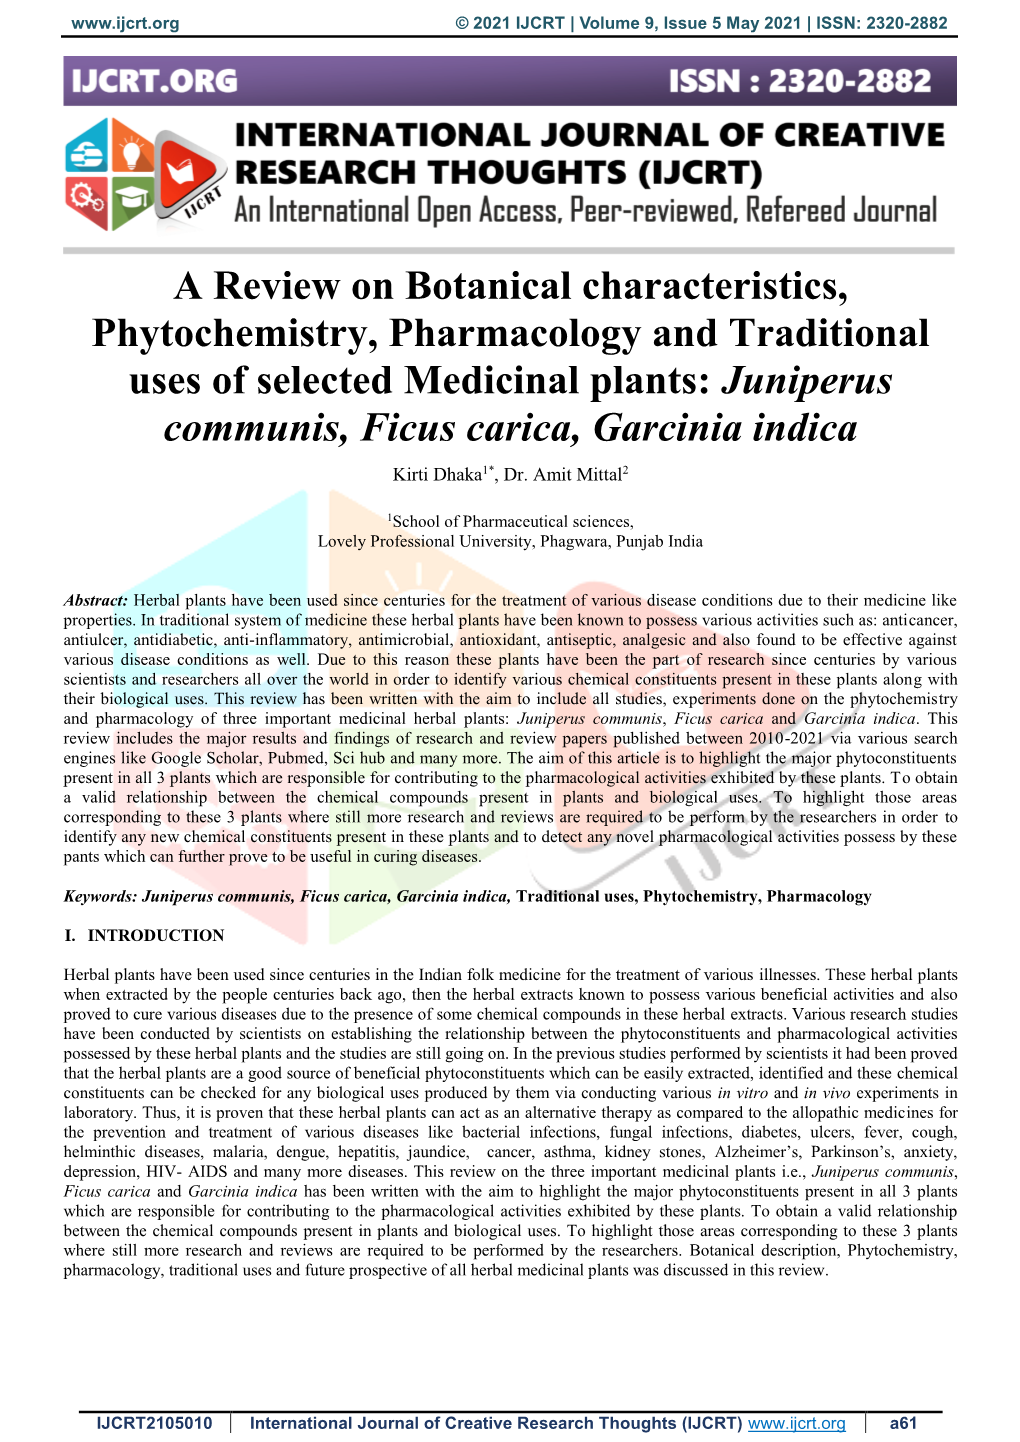 A Review on Botanical Characteristics, Phytochemistry, Pharmacology and Traditional Uses of Selected Medicinal Plants